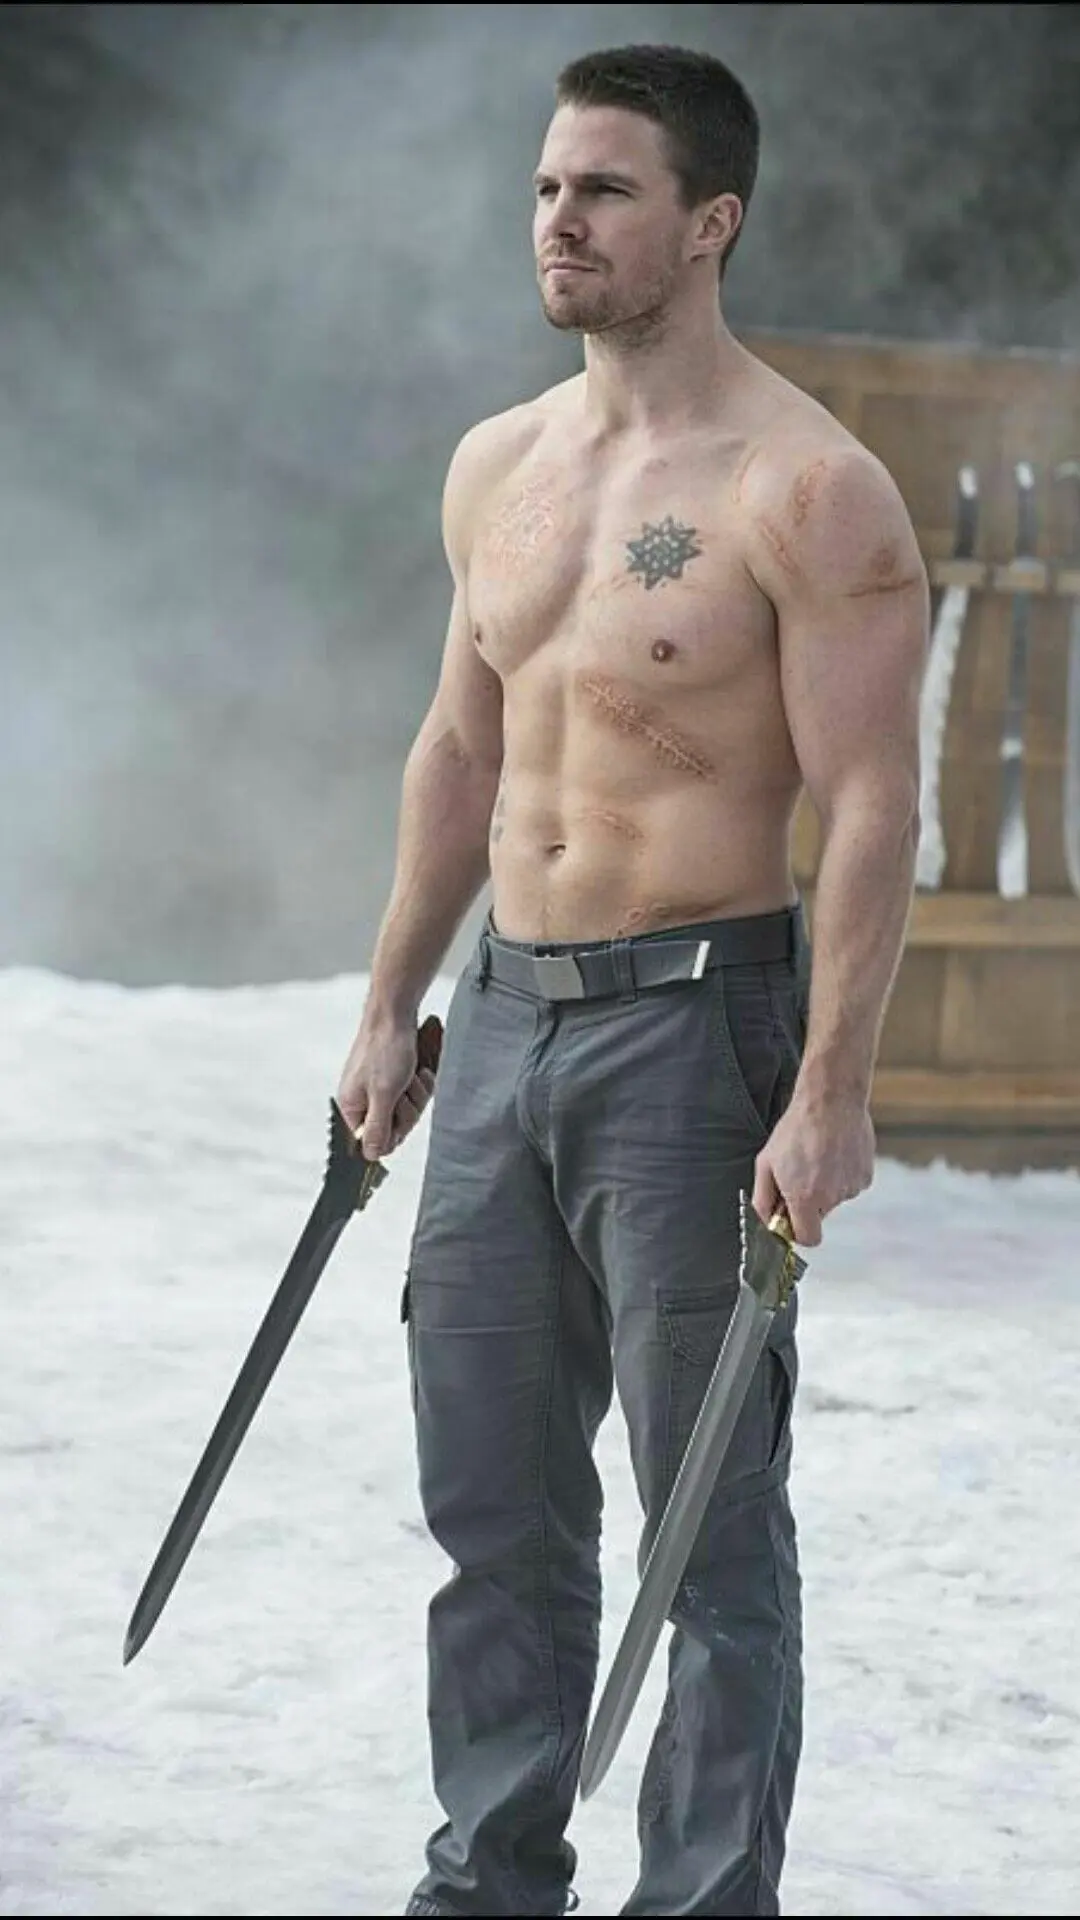 Stephen Amell shirtless pic and muscles